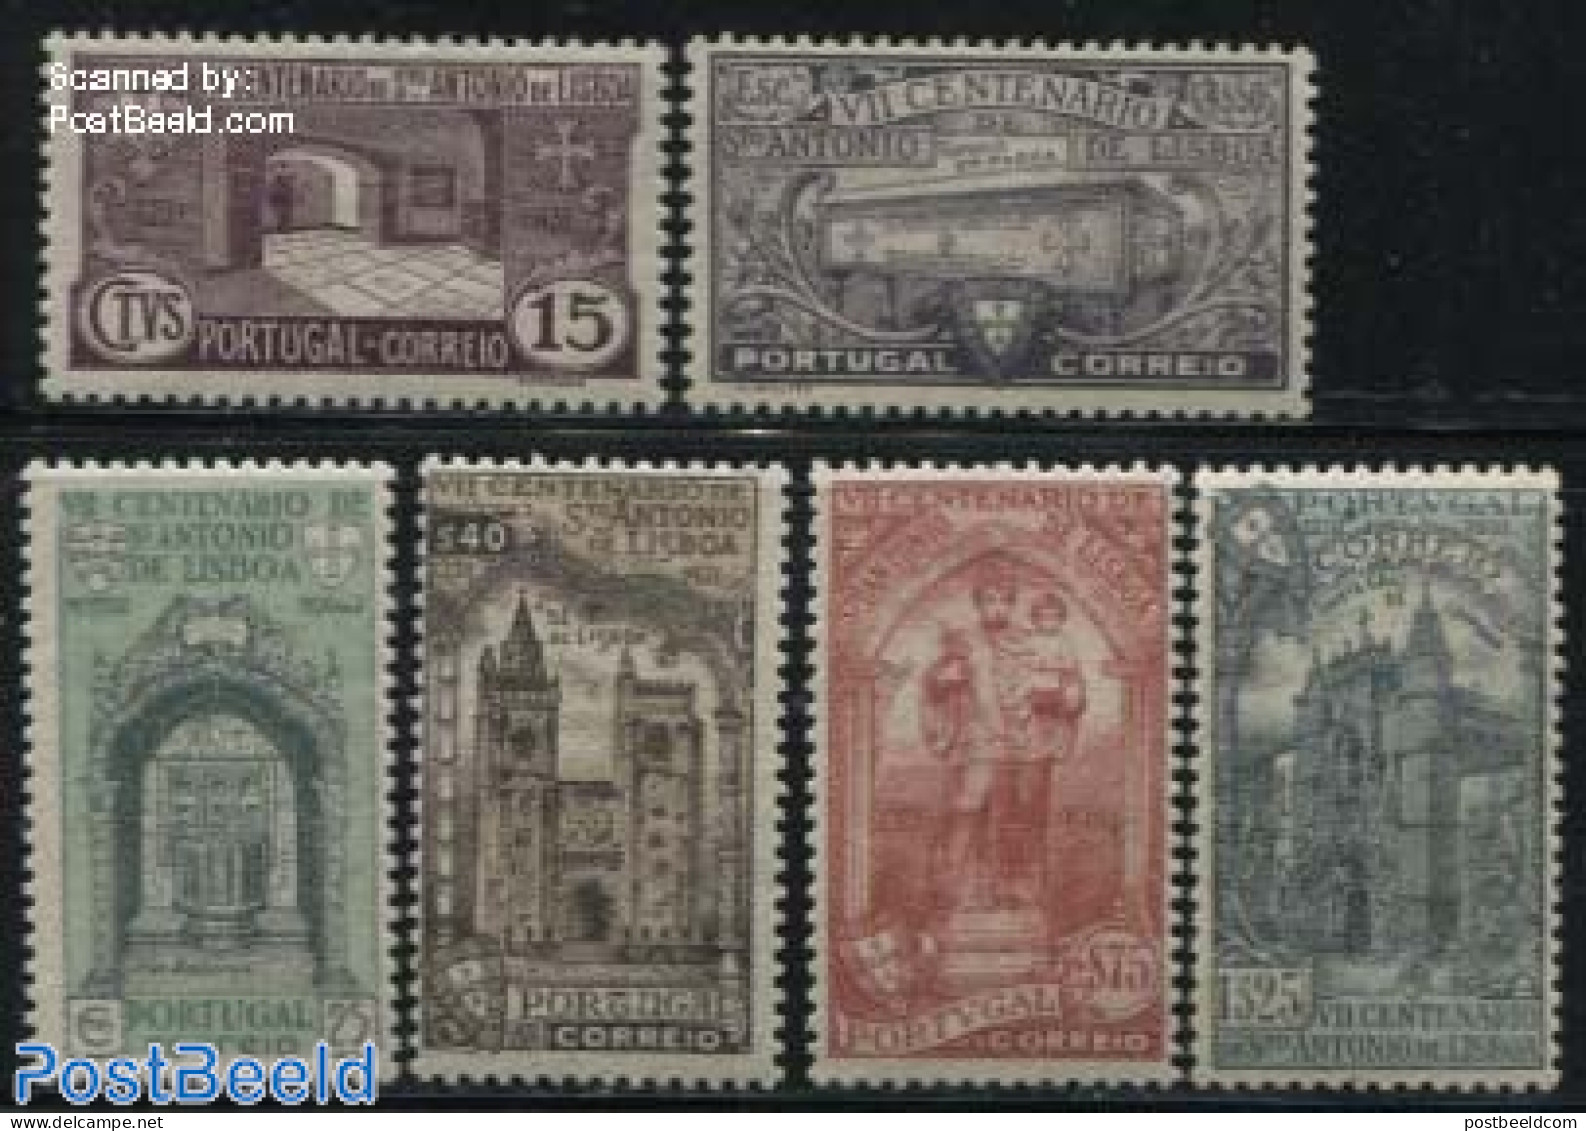 Portugal 1931 St. Antonius Of Padua 6v, Unused (hinged), Religion - Churches, Temples, Mosques, Synagogues - Religion - Neufs